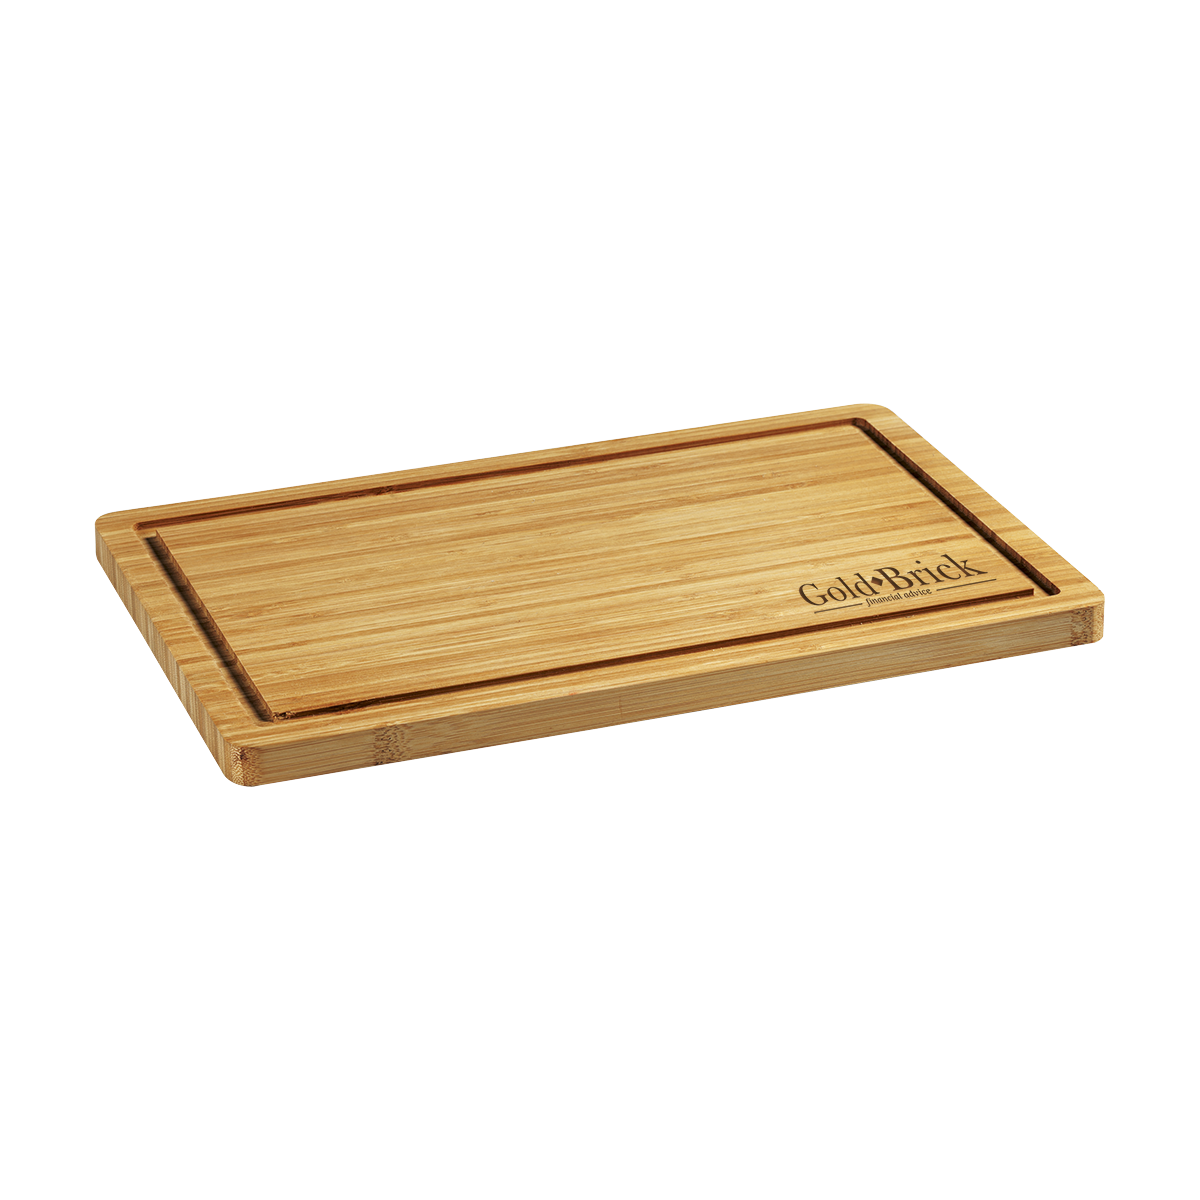 Custom Bamboo Chopping Board - Your logo printed with Pagerr